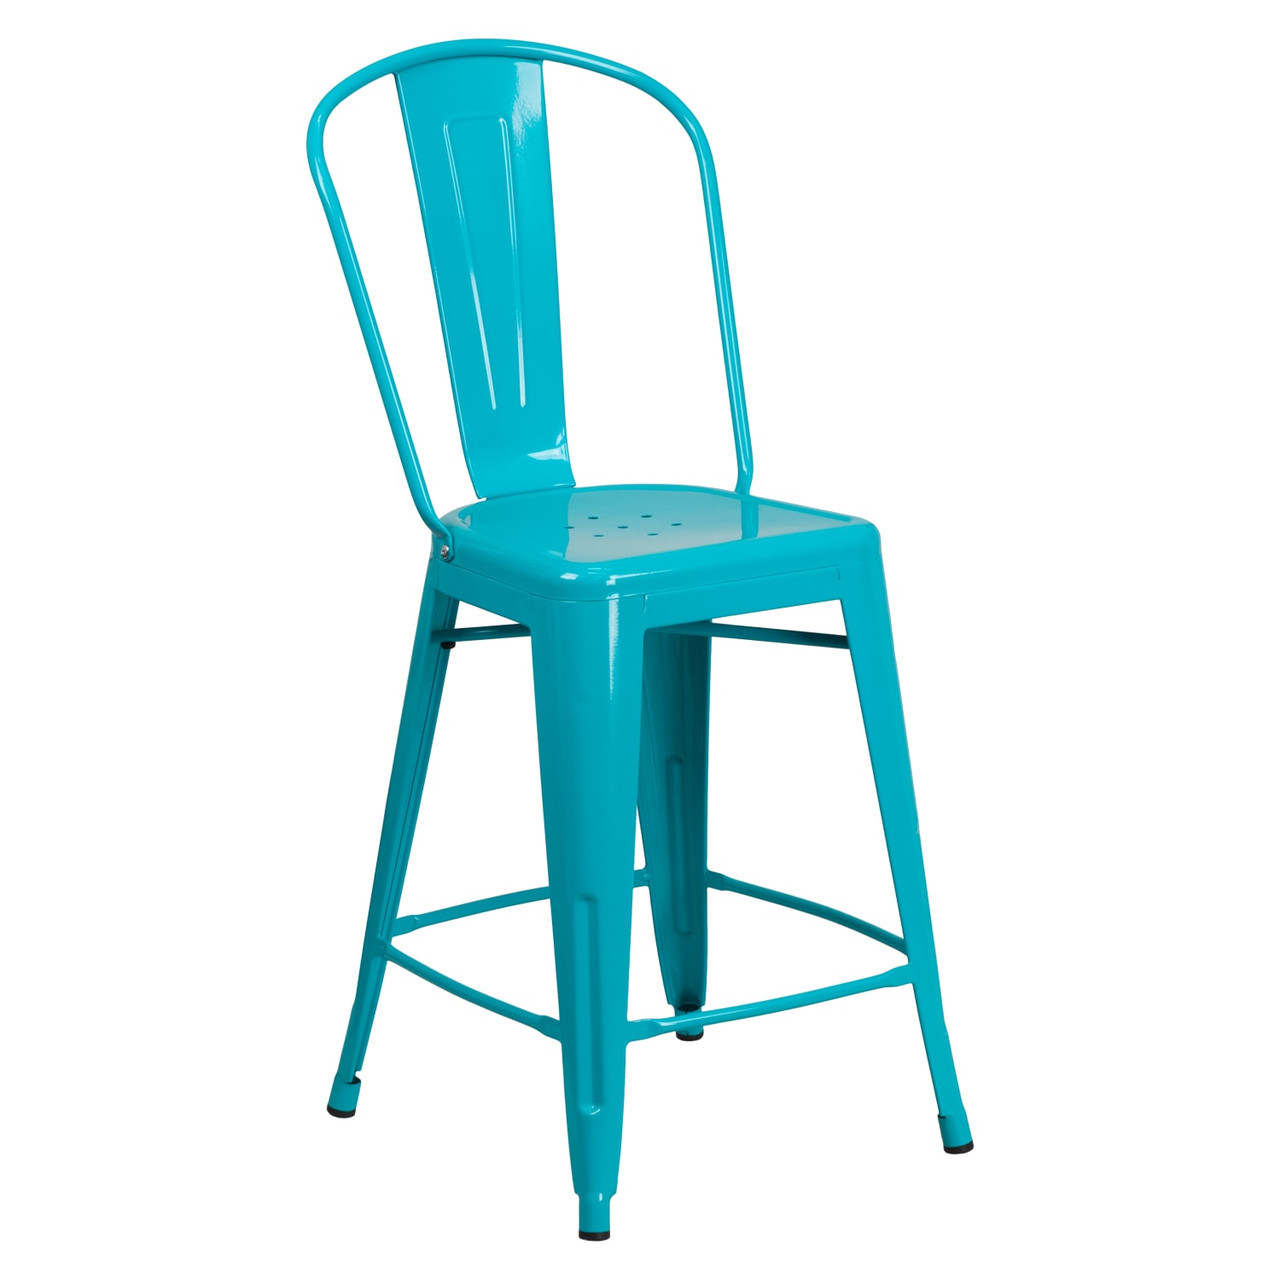 4 Pack 24” High Crystal Teal-Blue Metal Indoor-Outdoor Counter Height Stool with Back